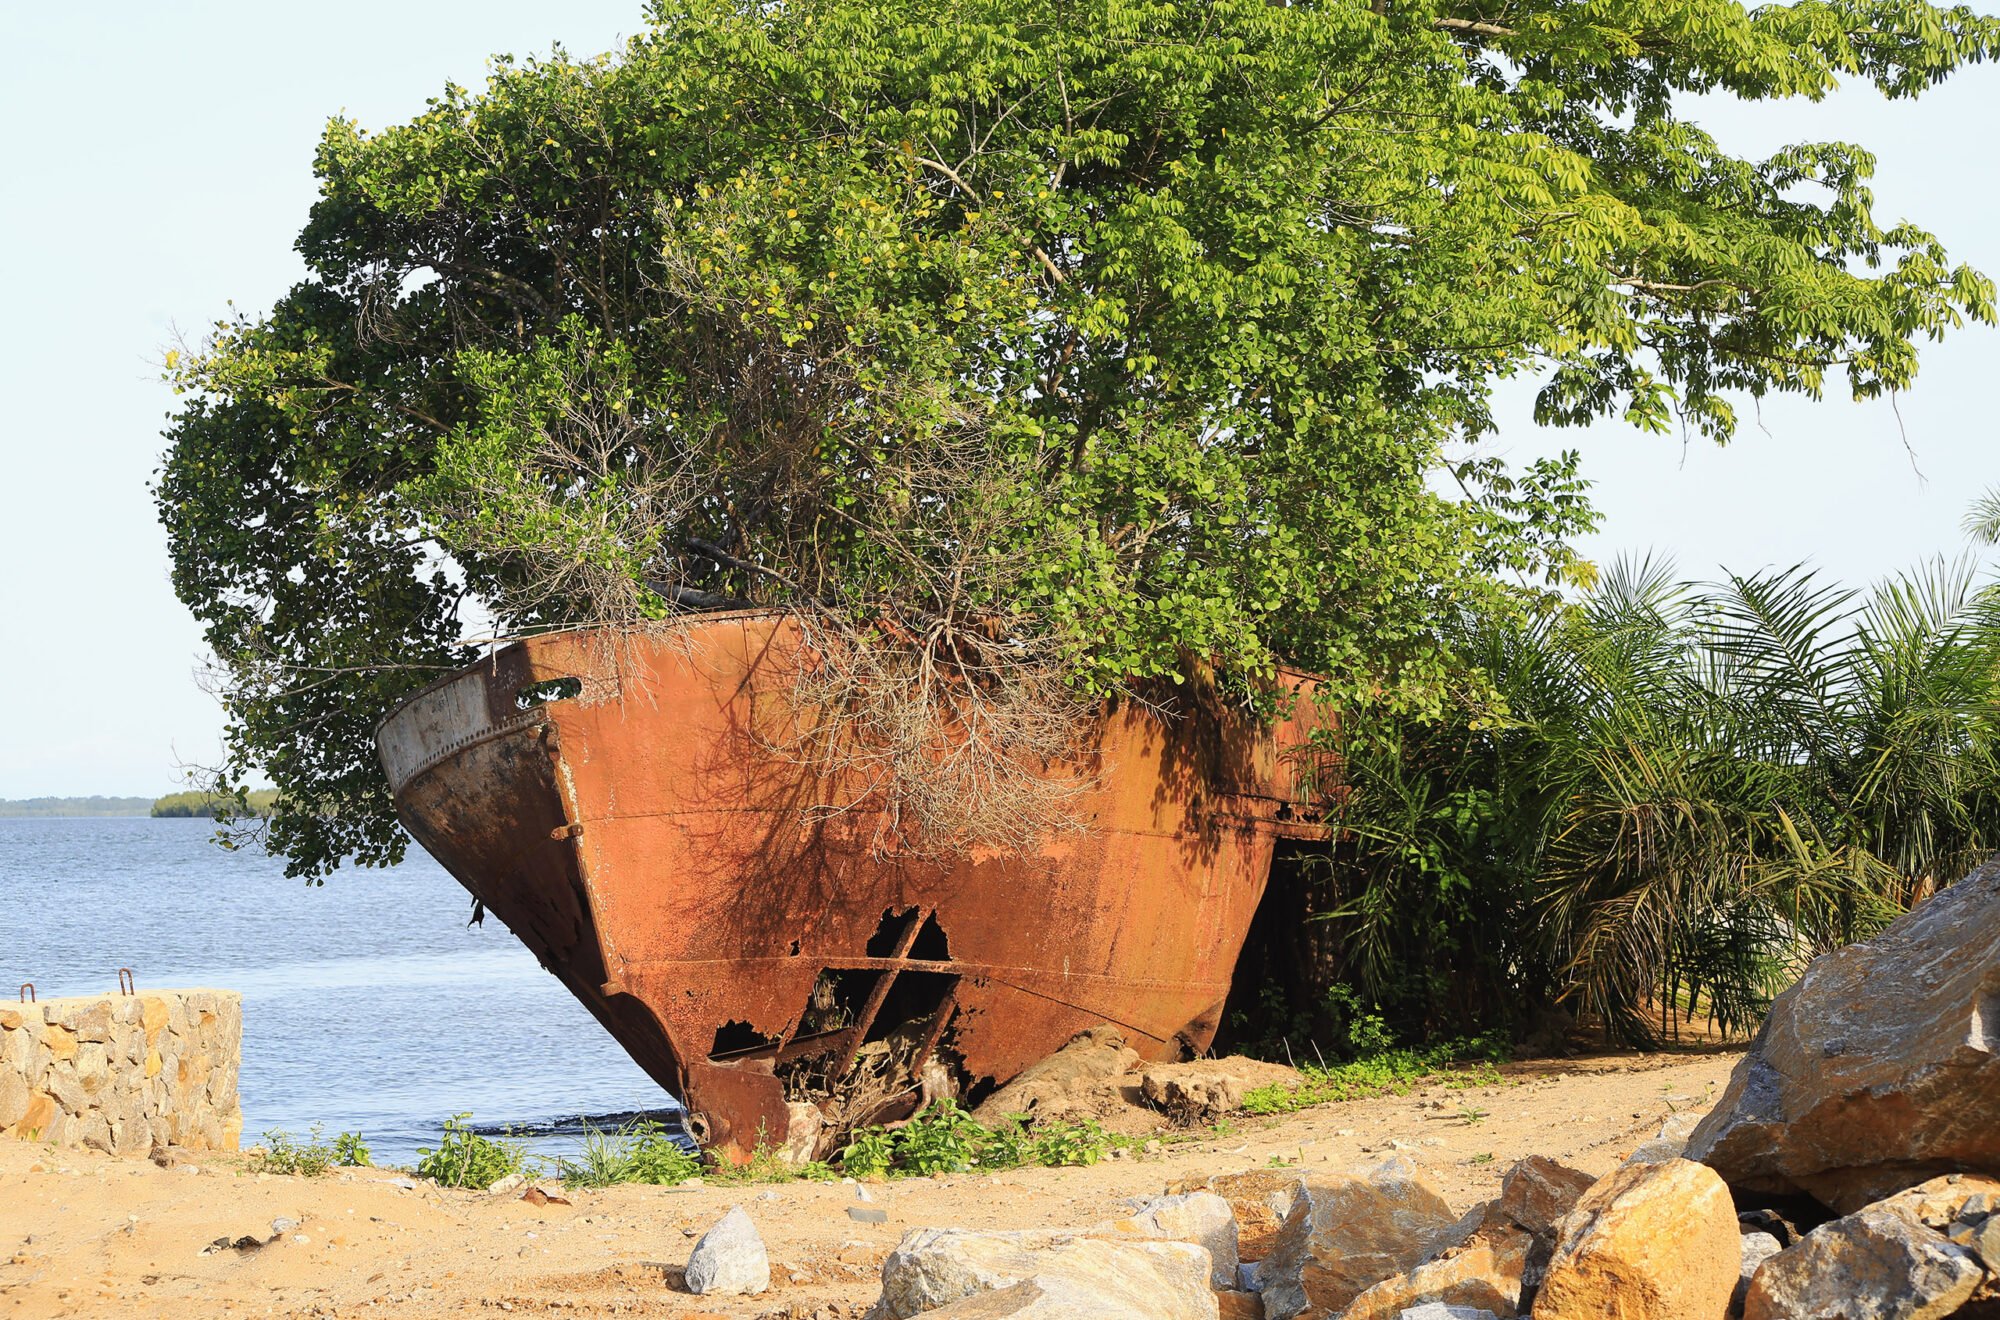 Slave ship on Sierra Leone coast: historically important relics of the slave trade in Sierra Leone are beginning to disappear 